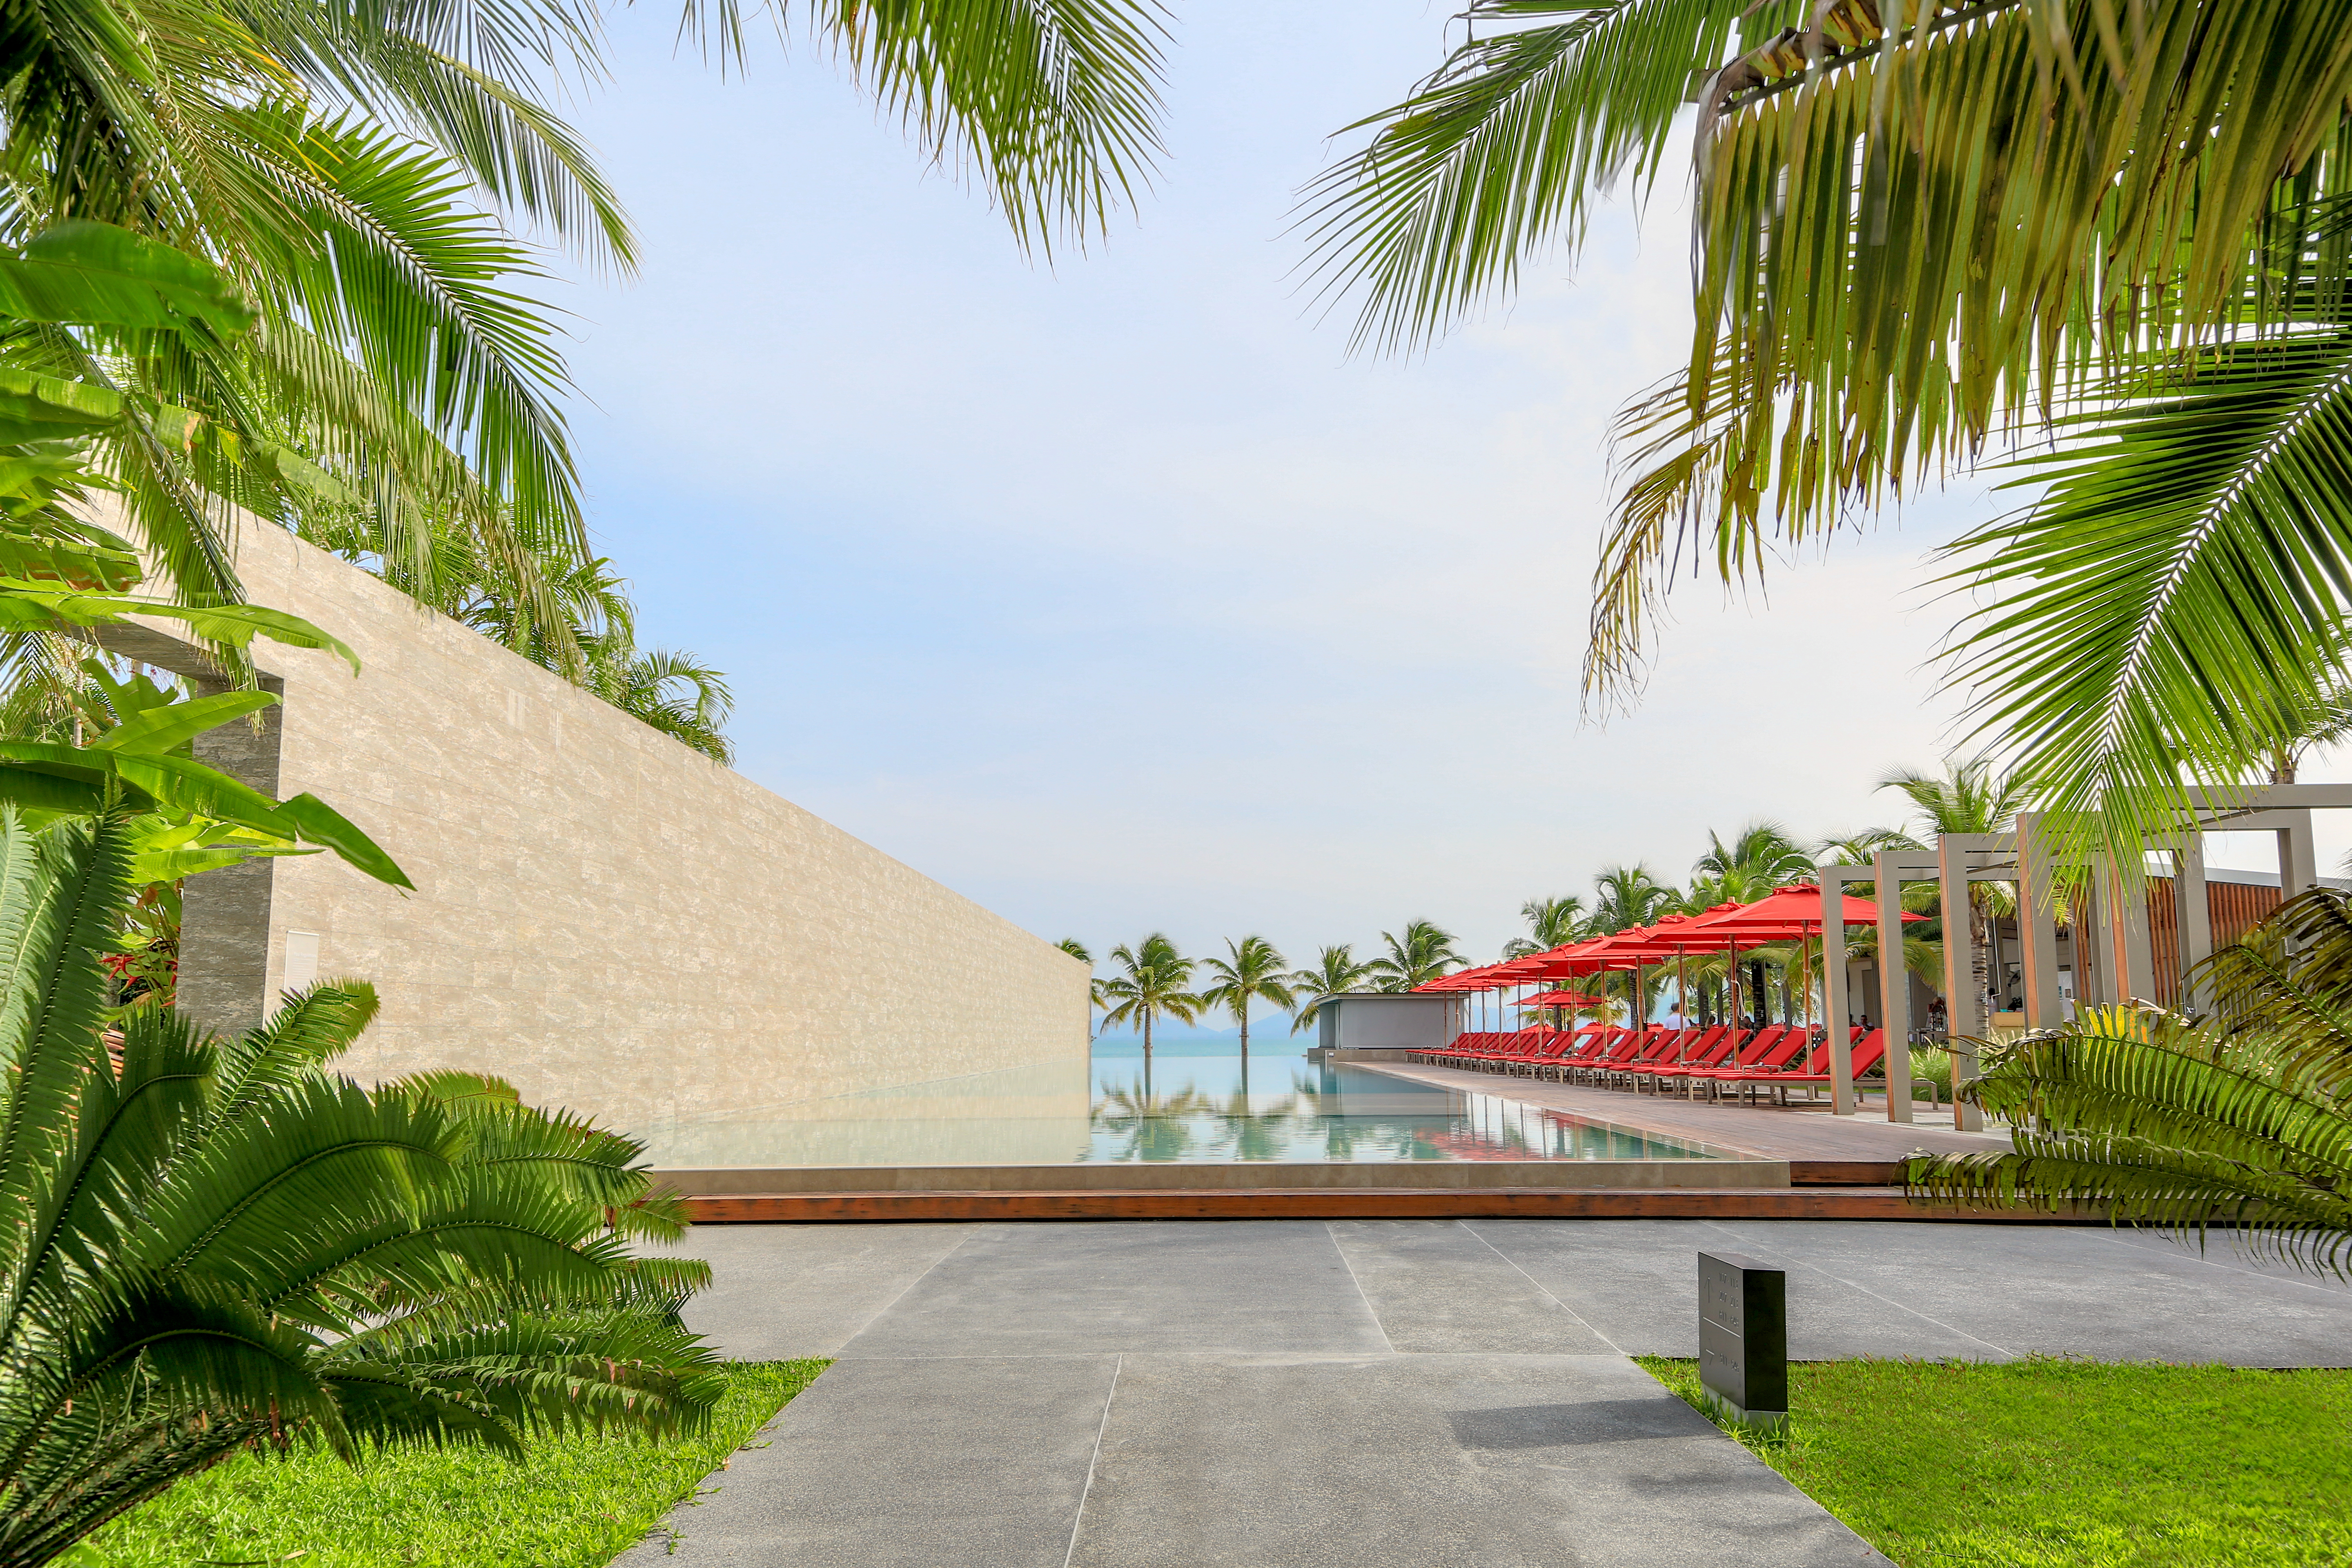 The COAST Adults Only Resort and Spa - Koh Samui